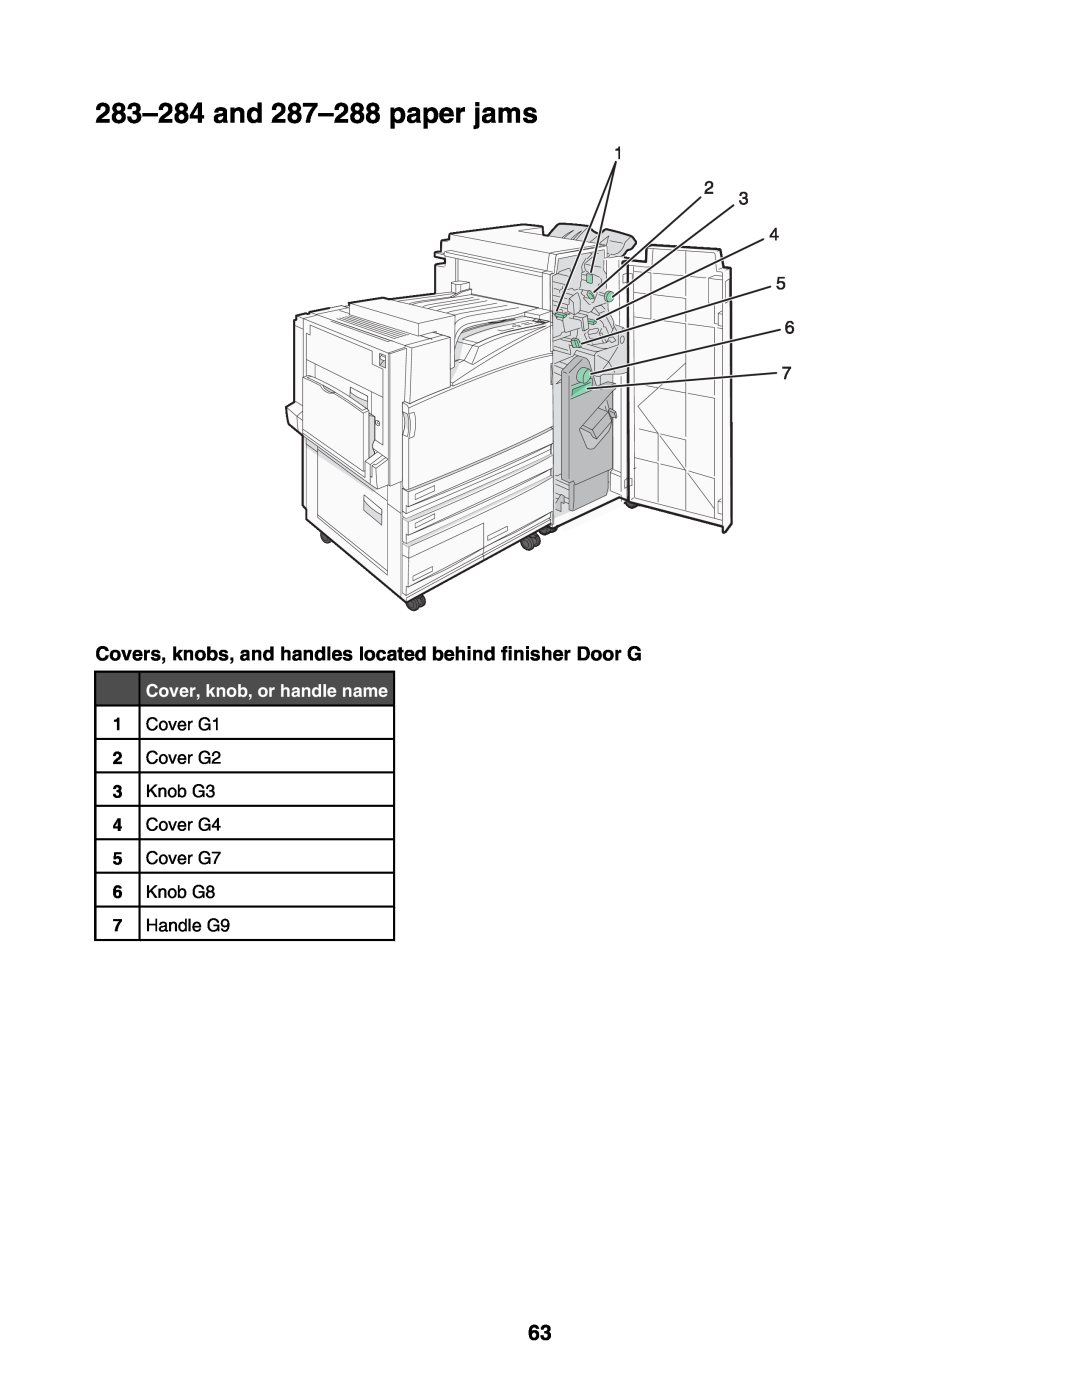 Lexmark C935 manual and 287-288 paper jams, Covers, knobs, and handles located behind finisher Door G, Cover G1, Cover G2 